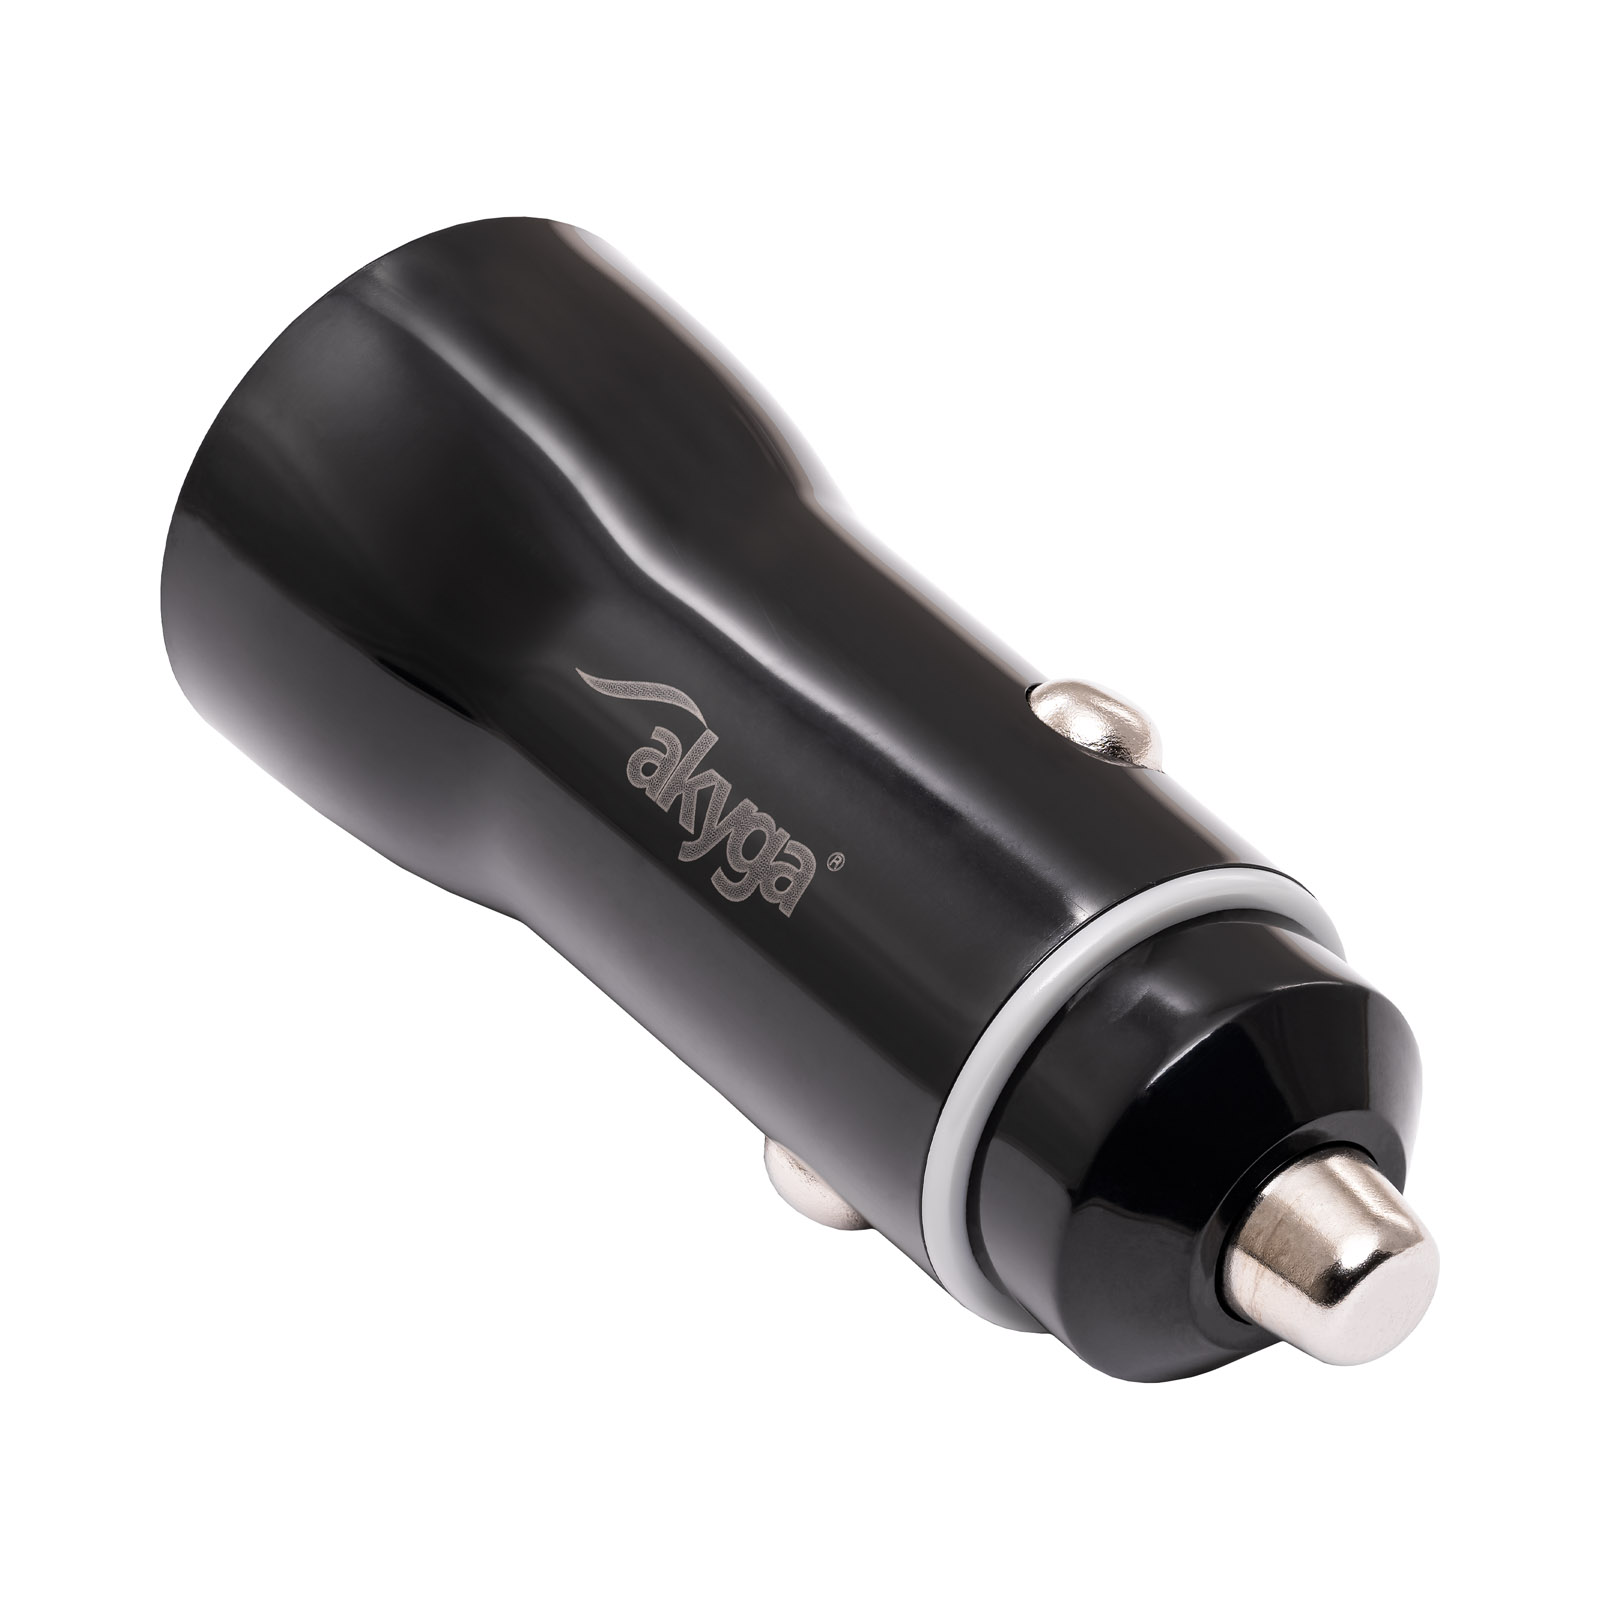 Main image USB Car Charger AK-CH-16 USB-A + USB-C PD 5-12V / max. 3A 36W Quick Charge 3.0